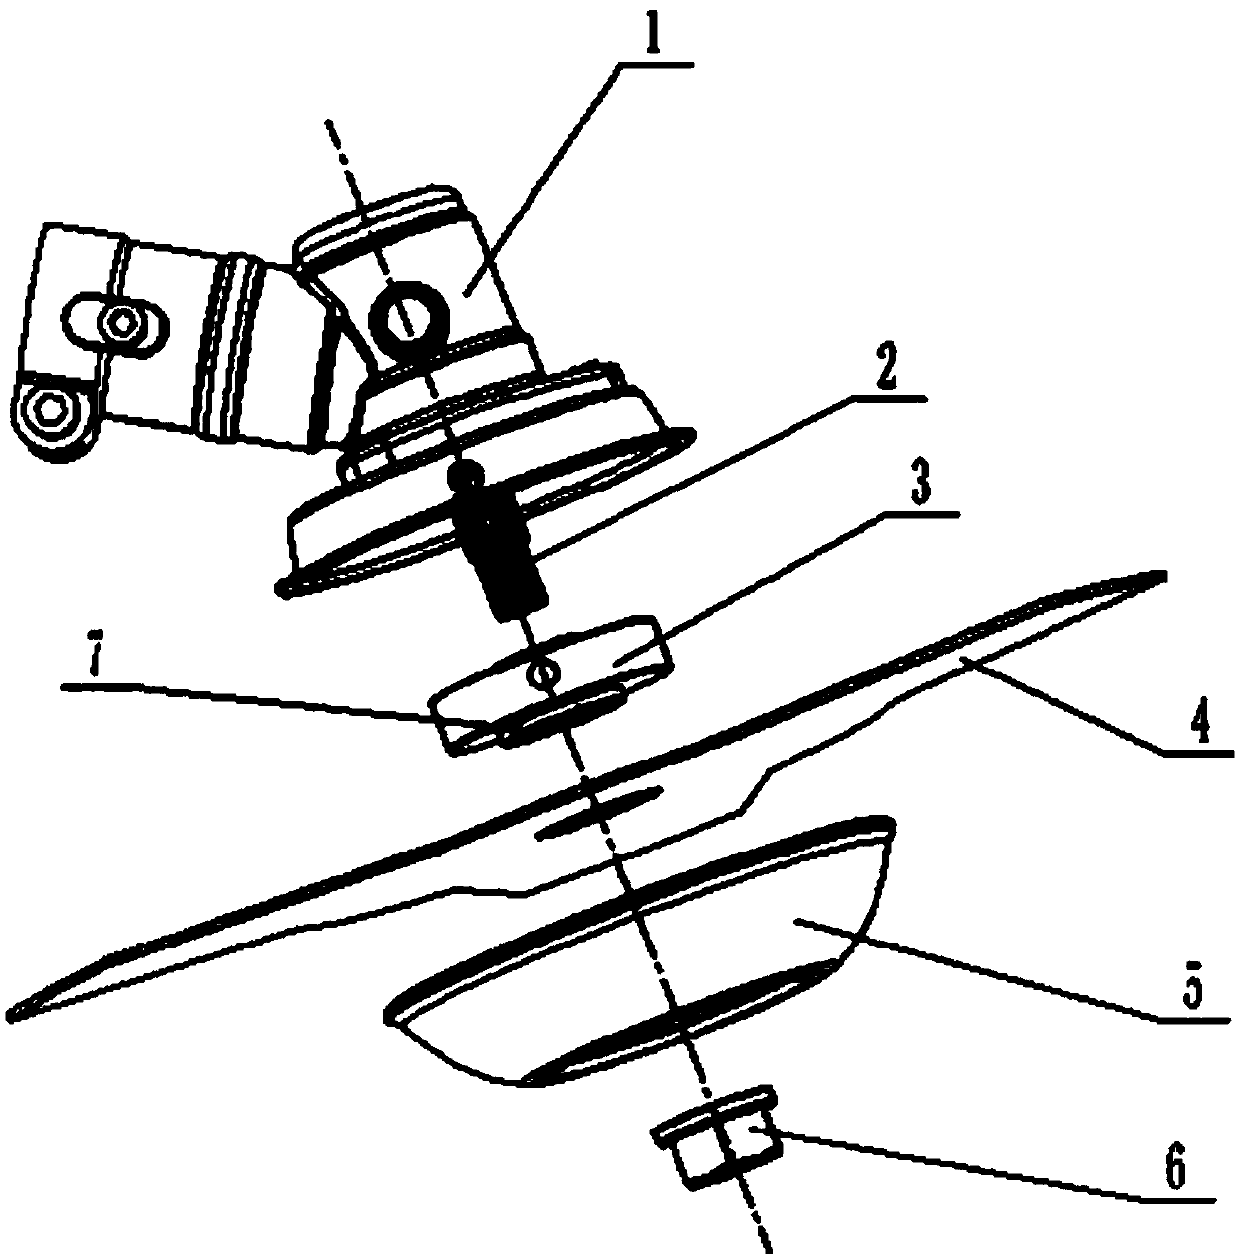 Bush cutter working head connection structure